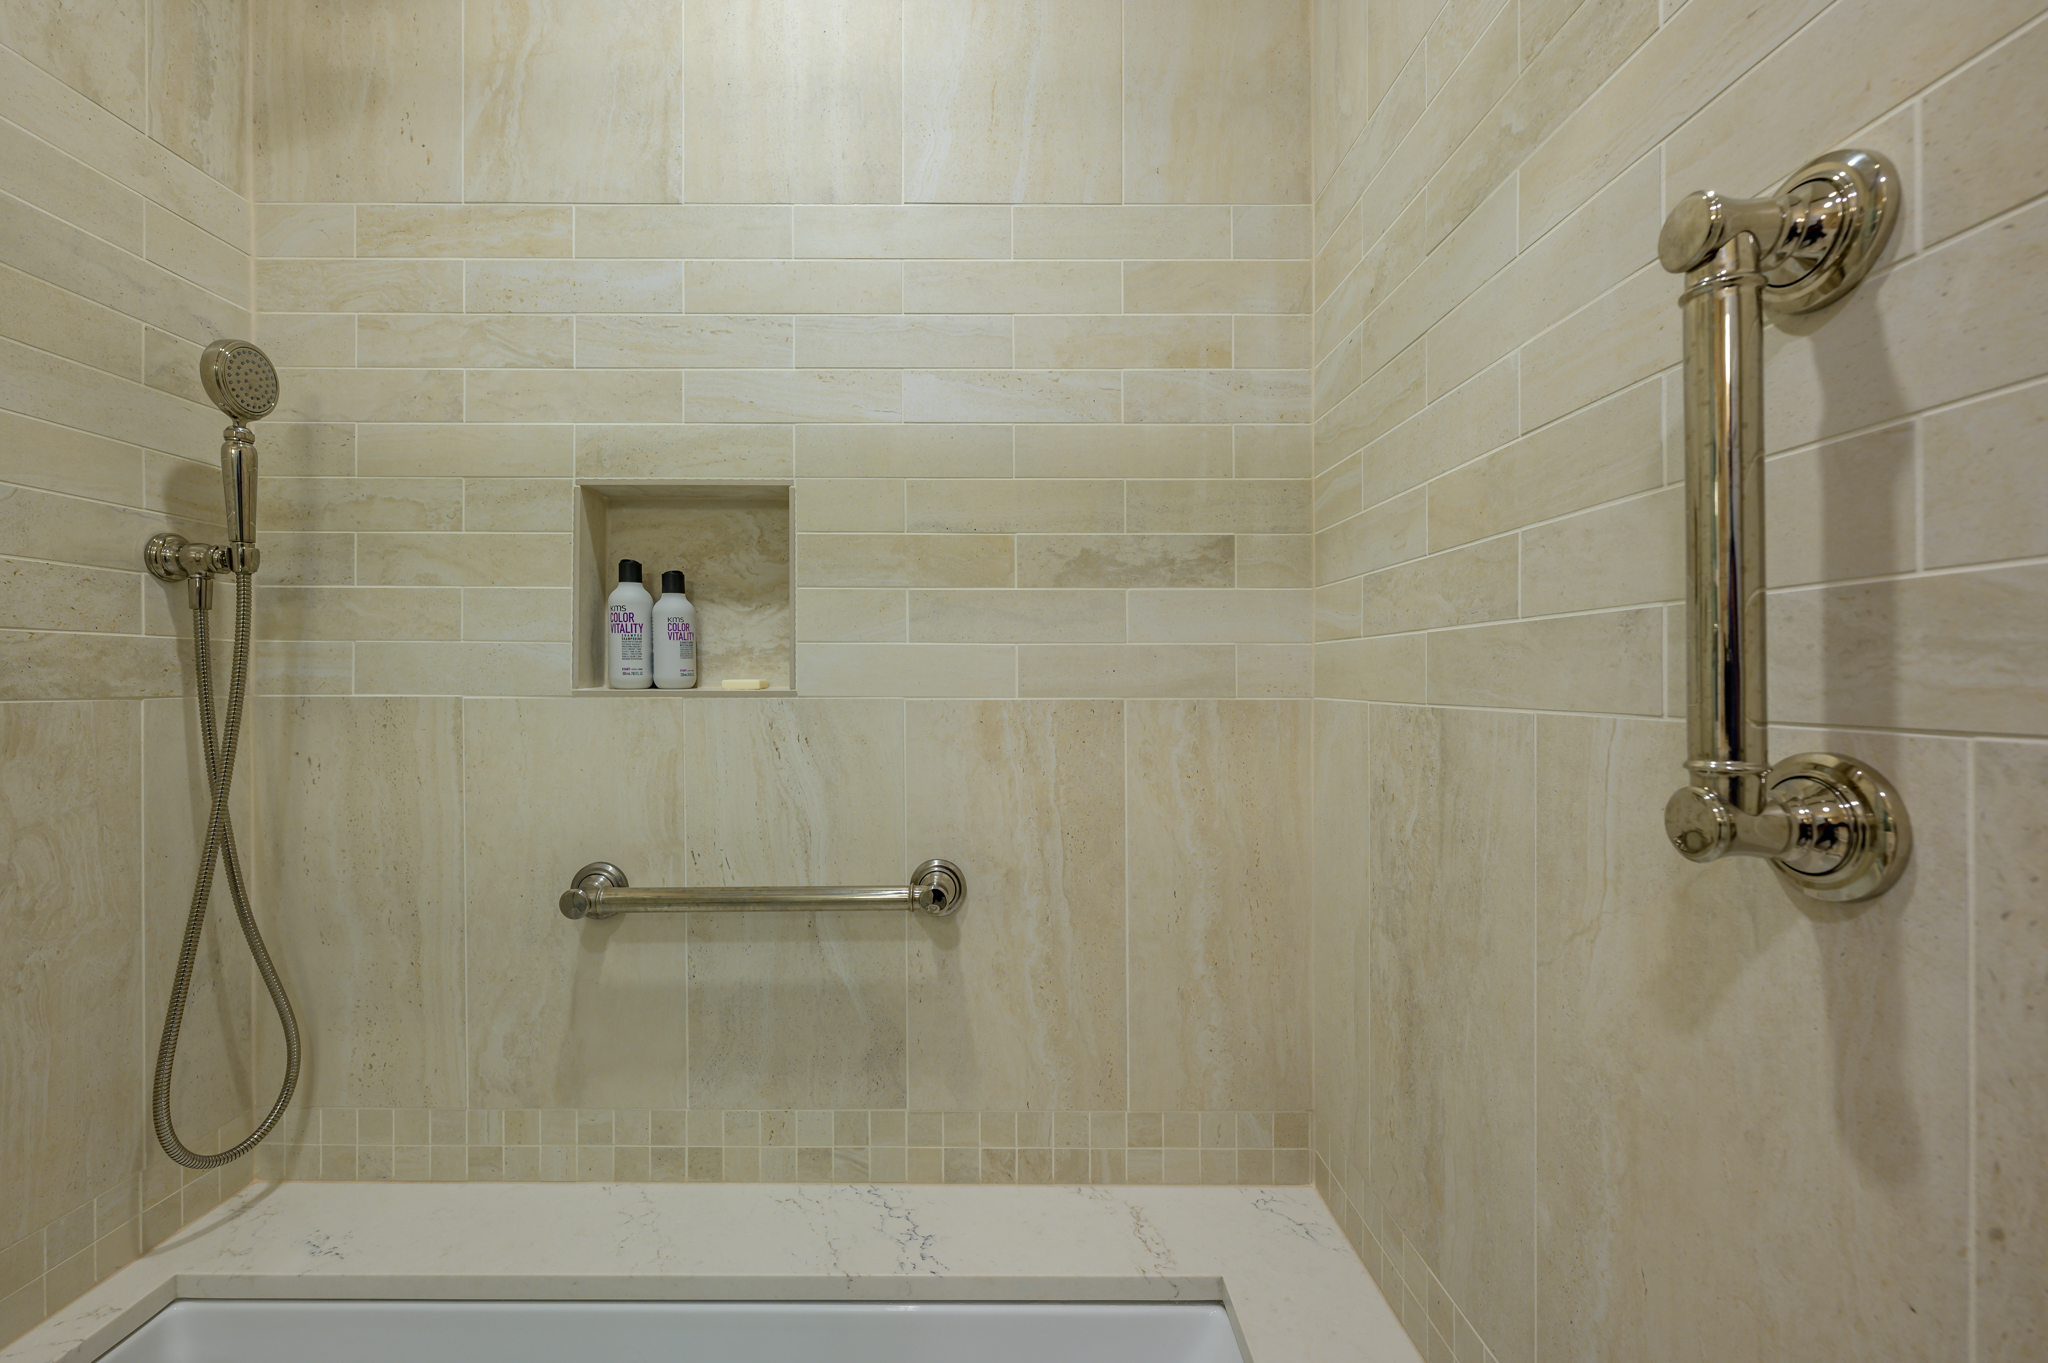 tan tile shower/bathtub with stainless steel faucet and handles